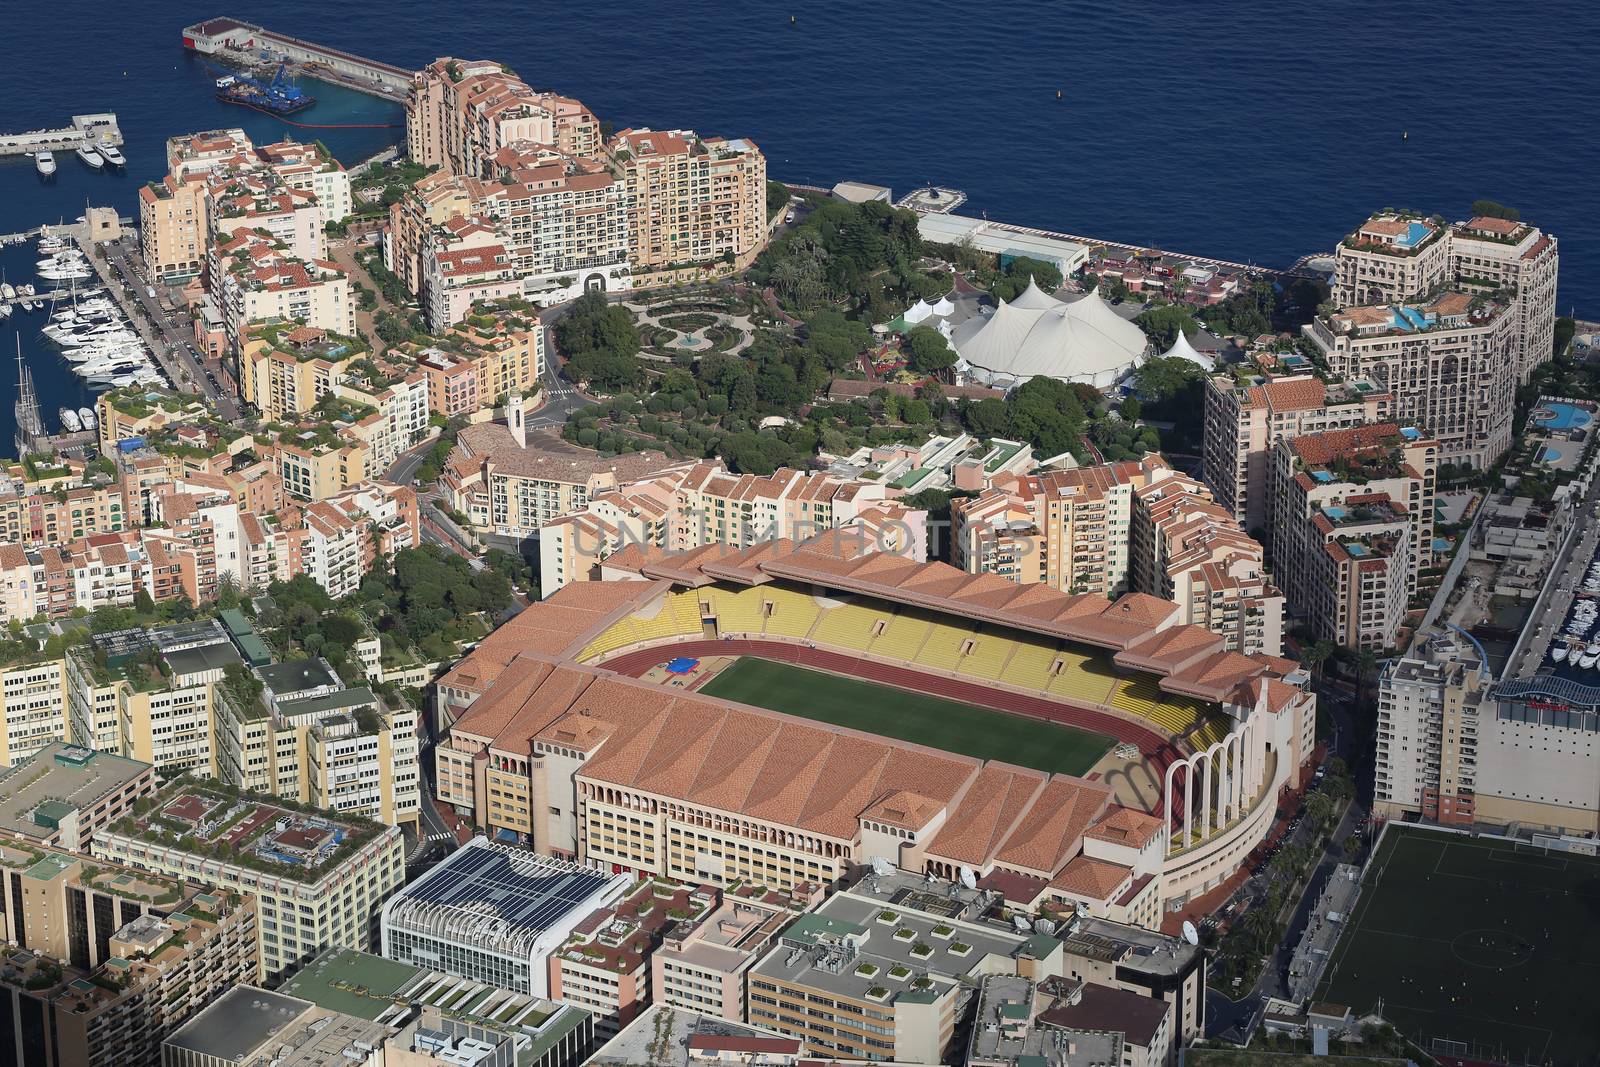 Fontvieille, Monaco - June 1, 2016: Aerial view of Stade Louis II and Fontvieille District in Monaco, south of France